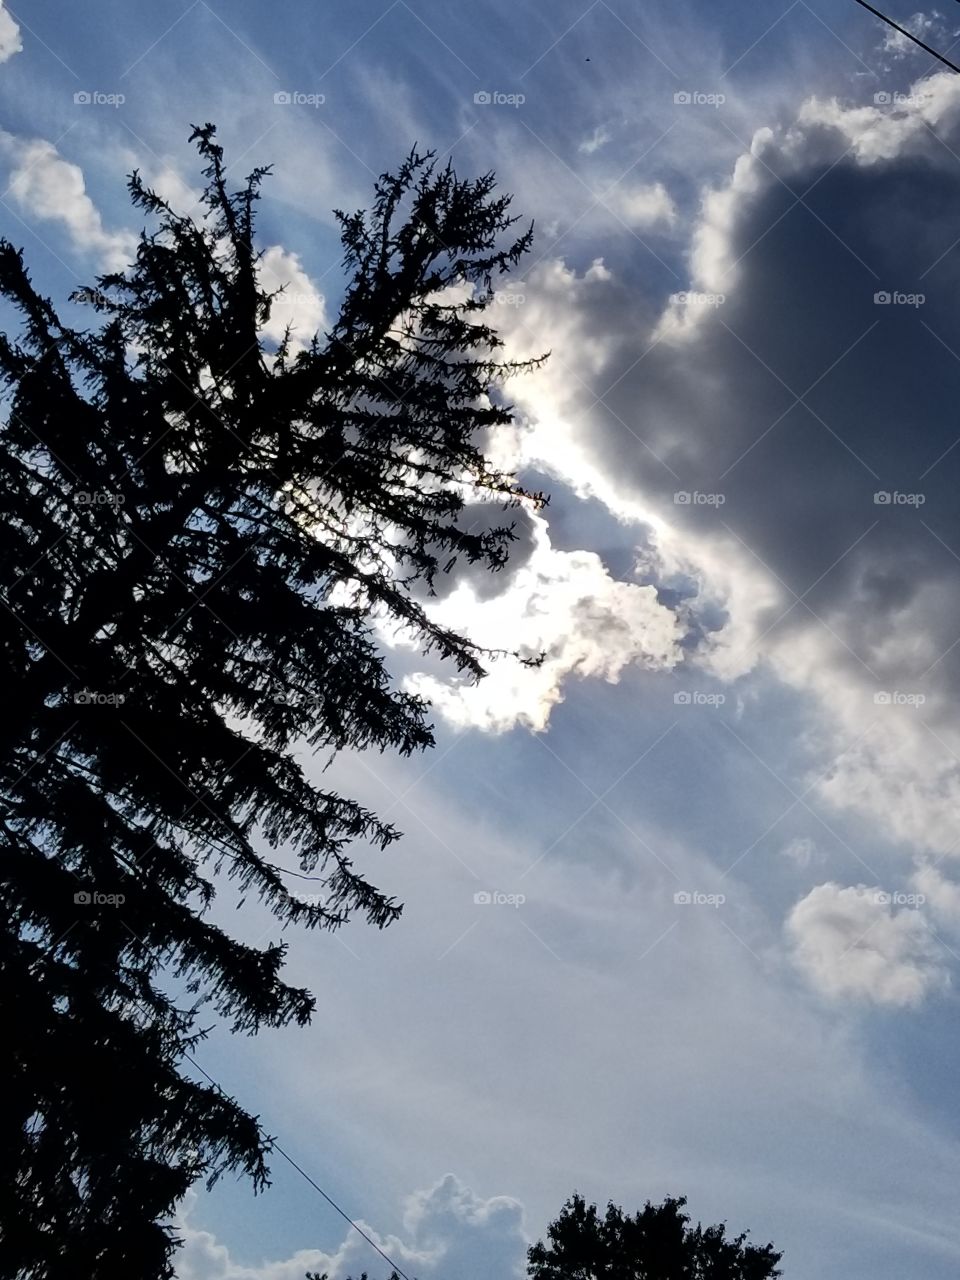 I was laying in the grass in my back yard and was moving my camera in different directions. This picture shows how looking up can show you the most wonderful surprises.